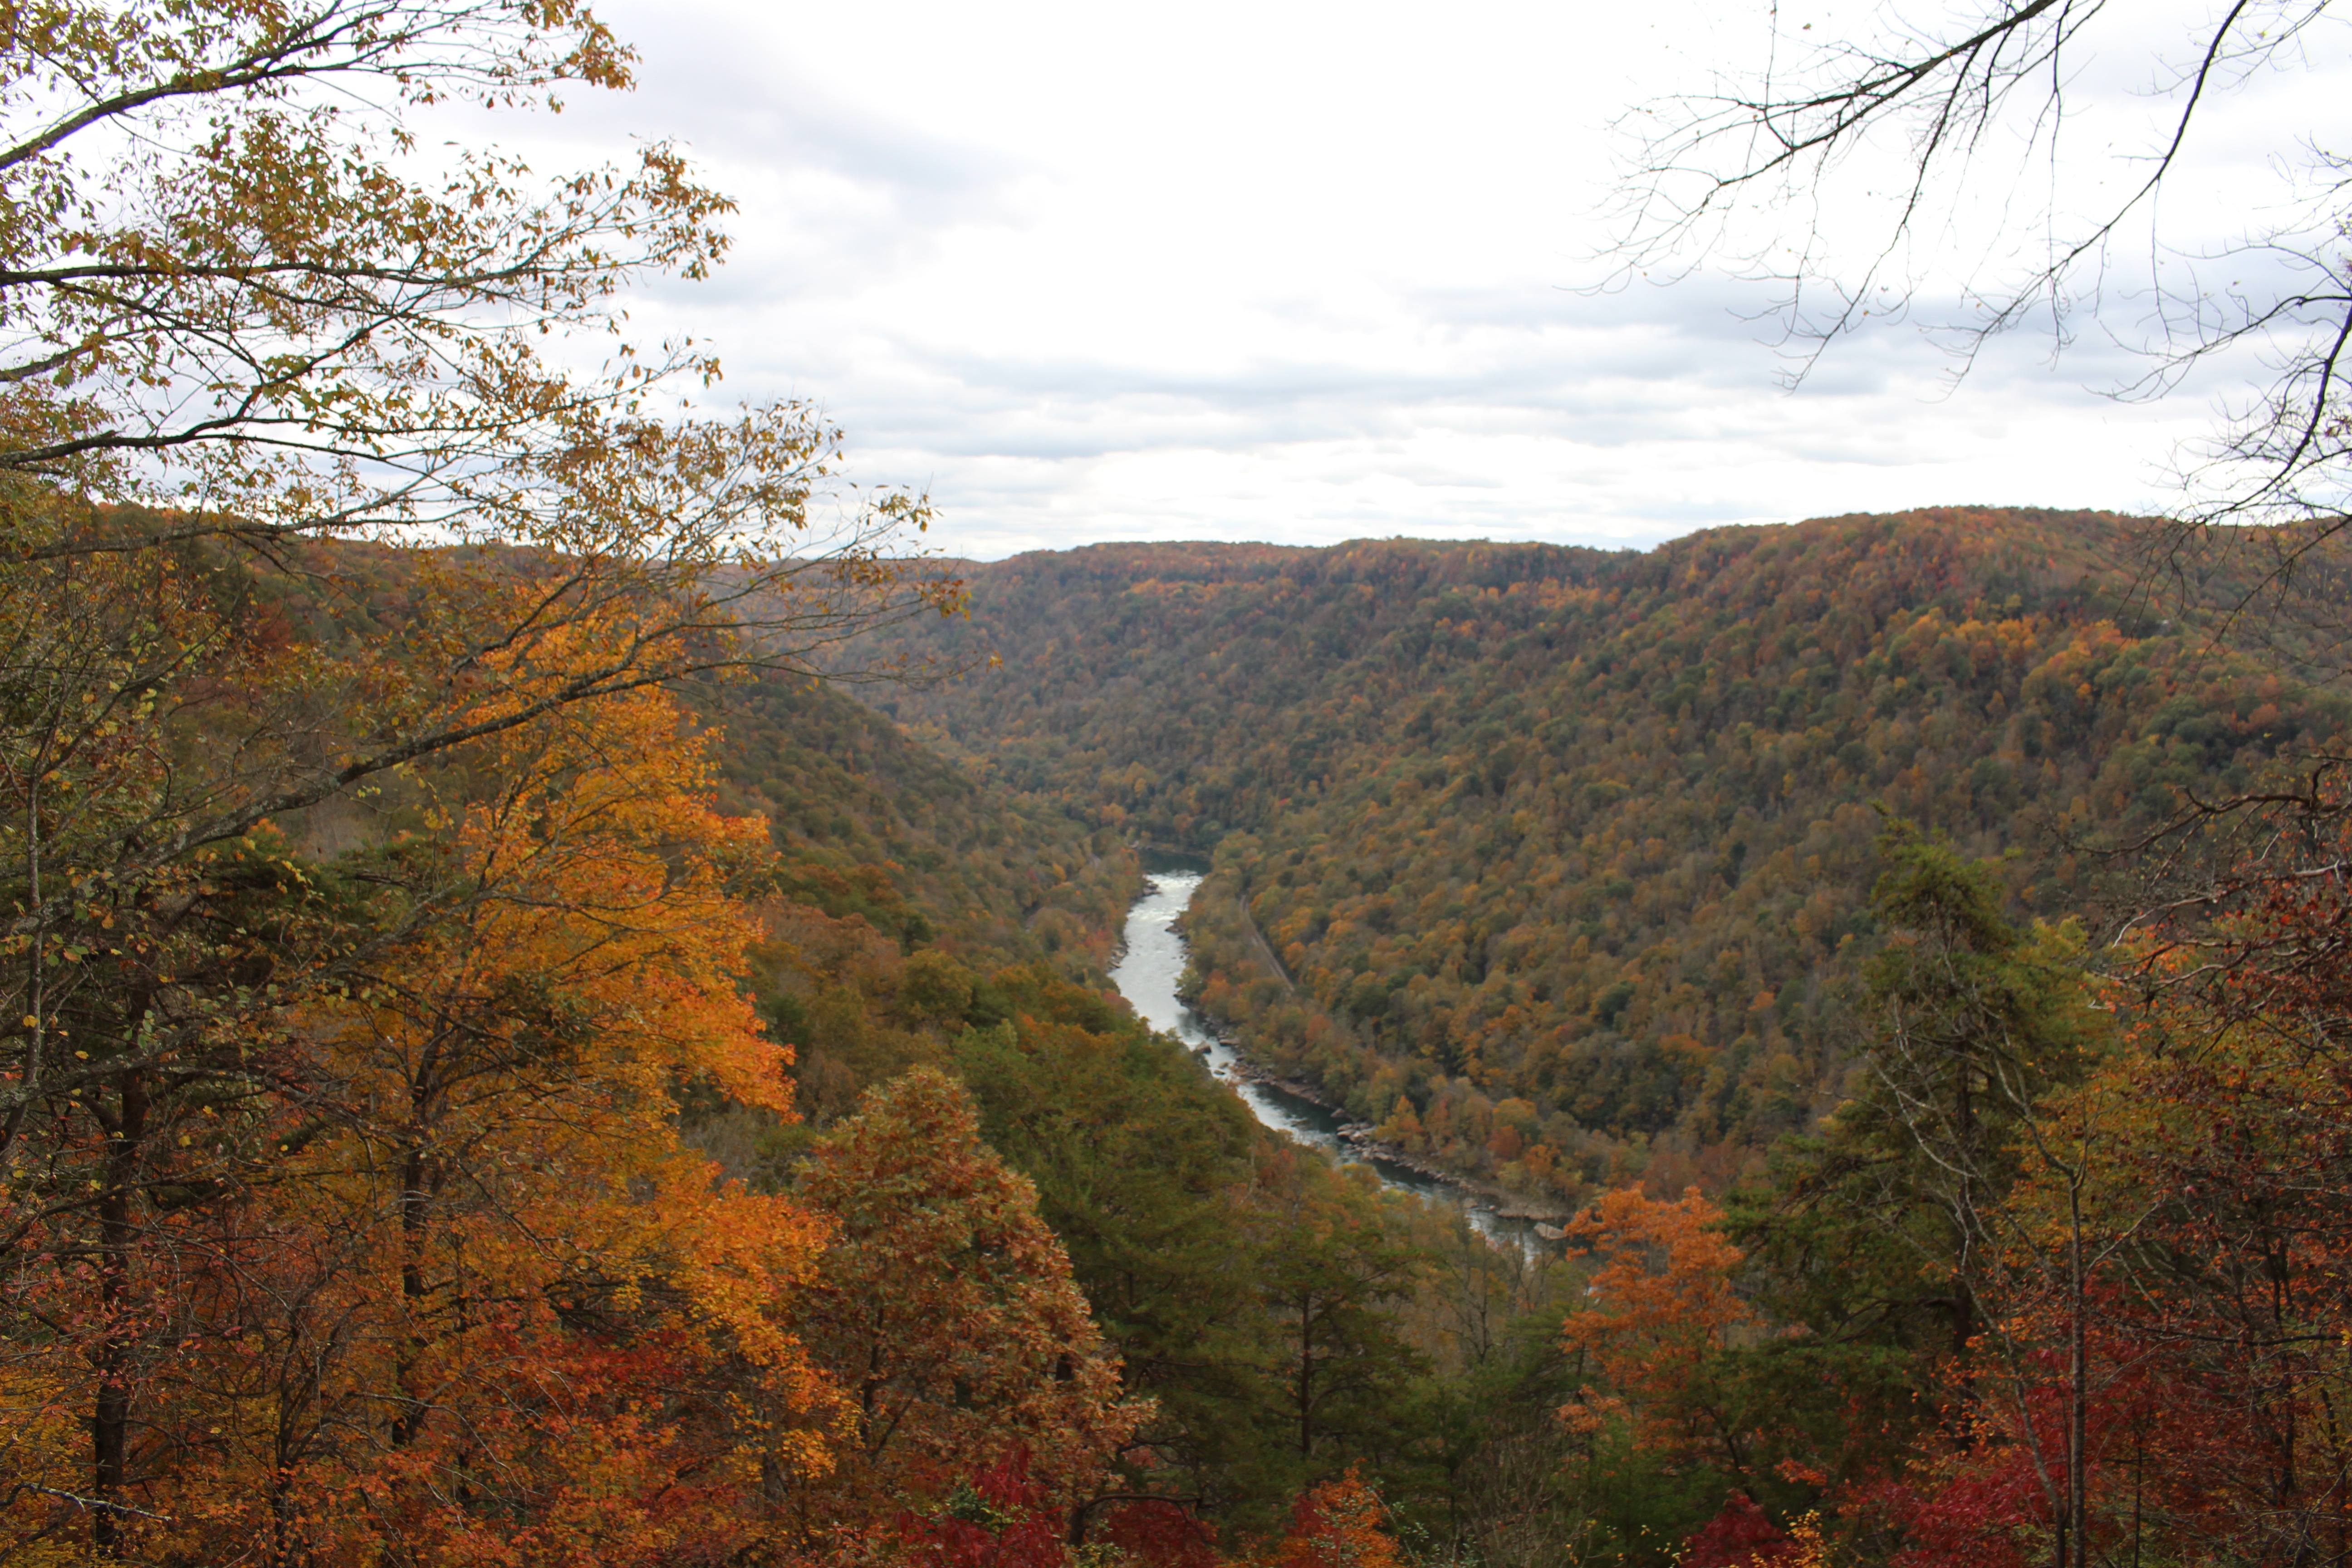 Photo- Background image of the New River Gorge - West Virginia U.S.A